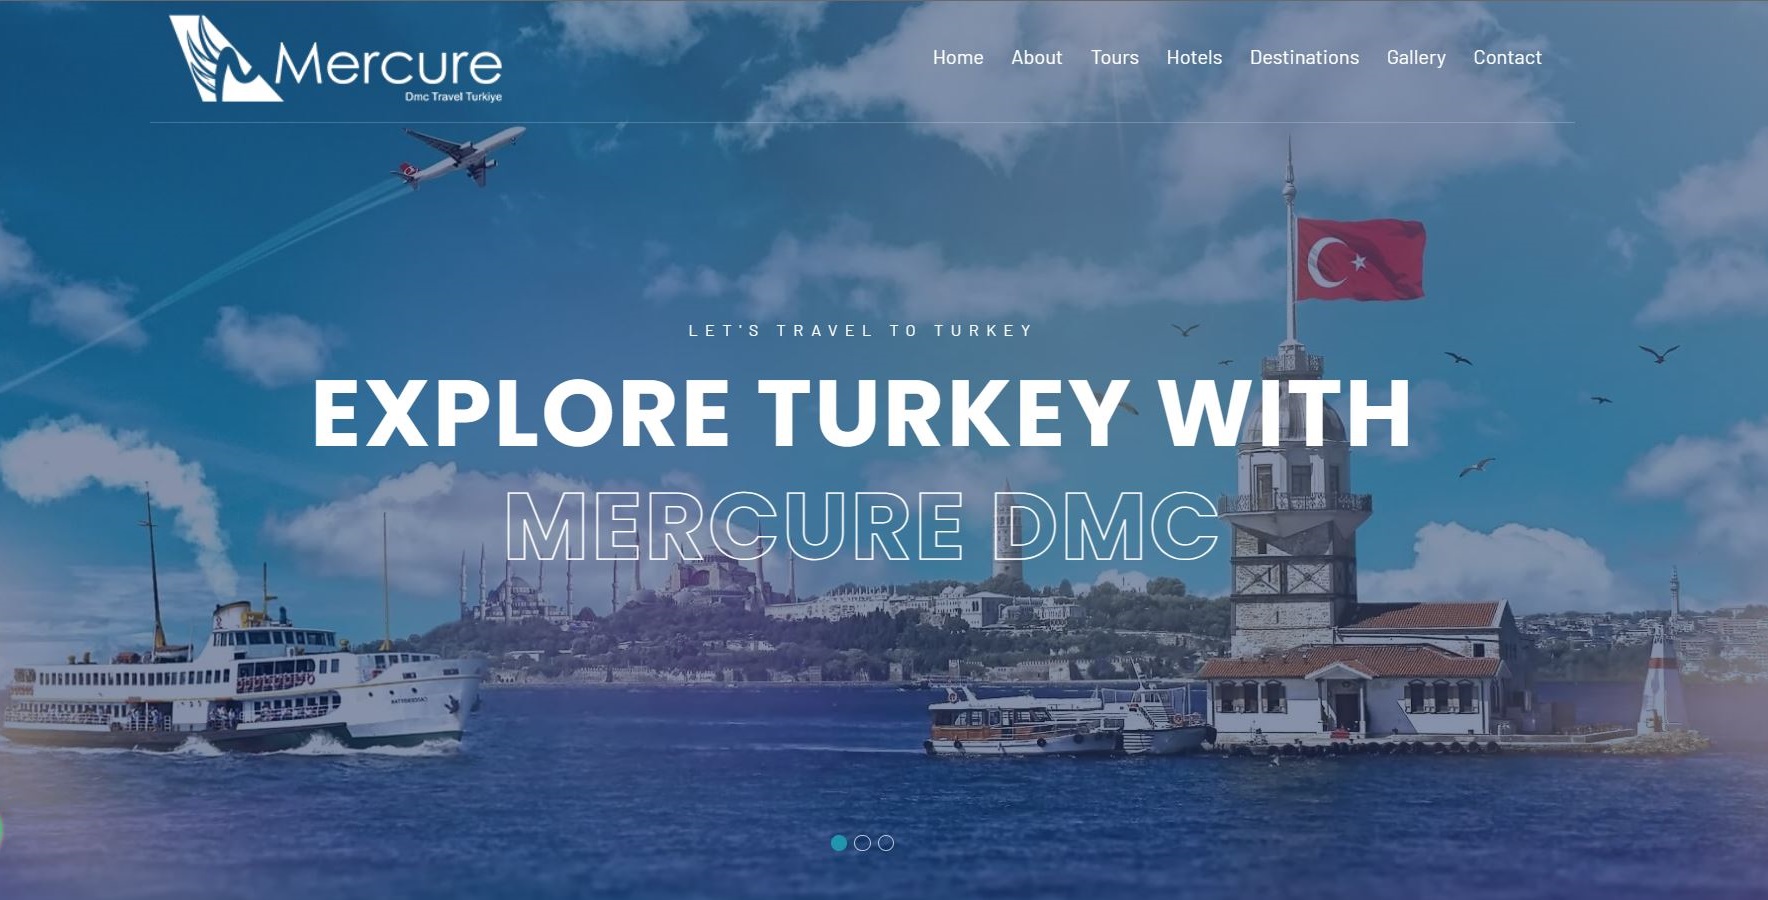 Let's travel to Turkey Explore Istanbul With Mercure DMC